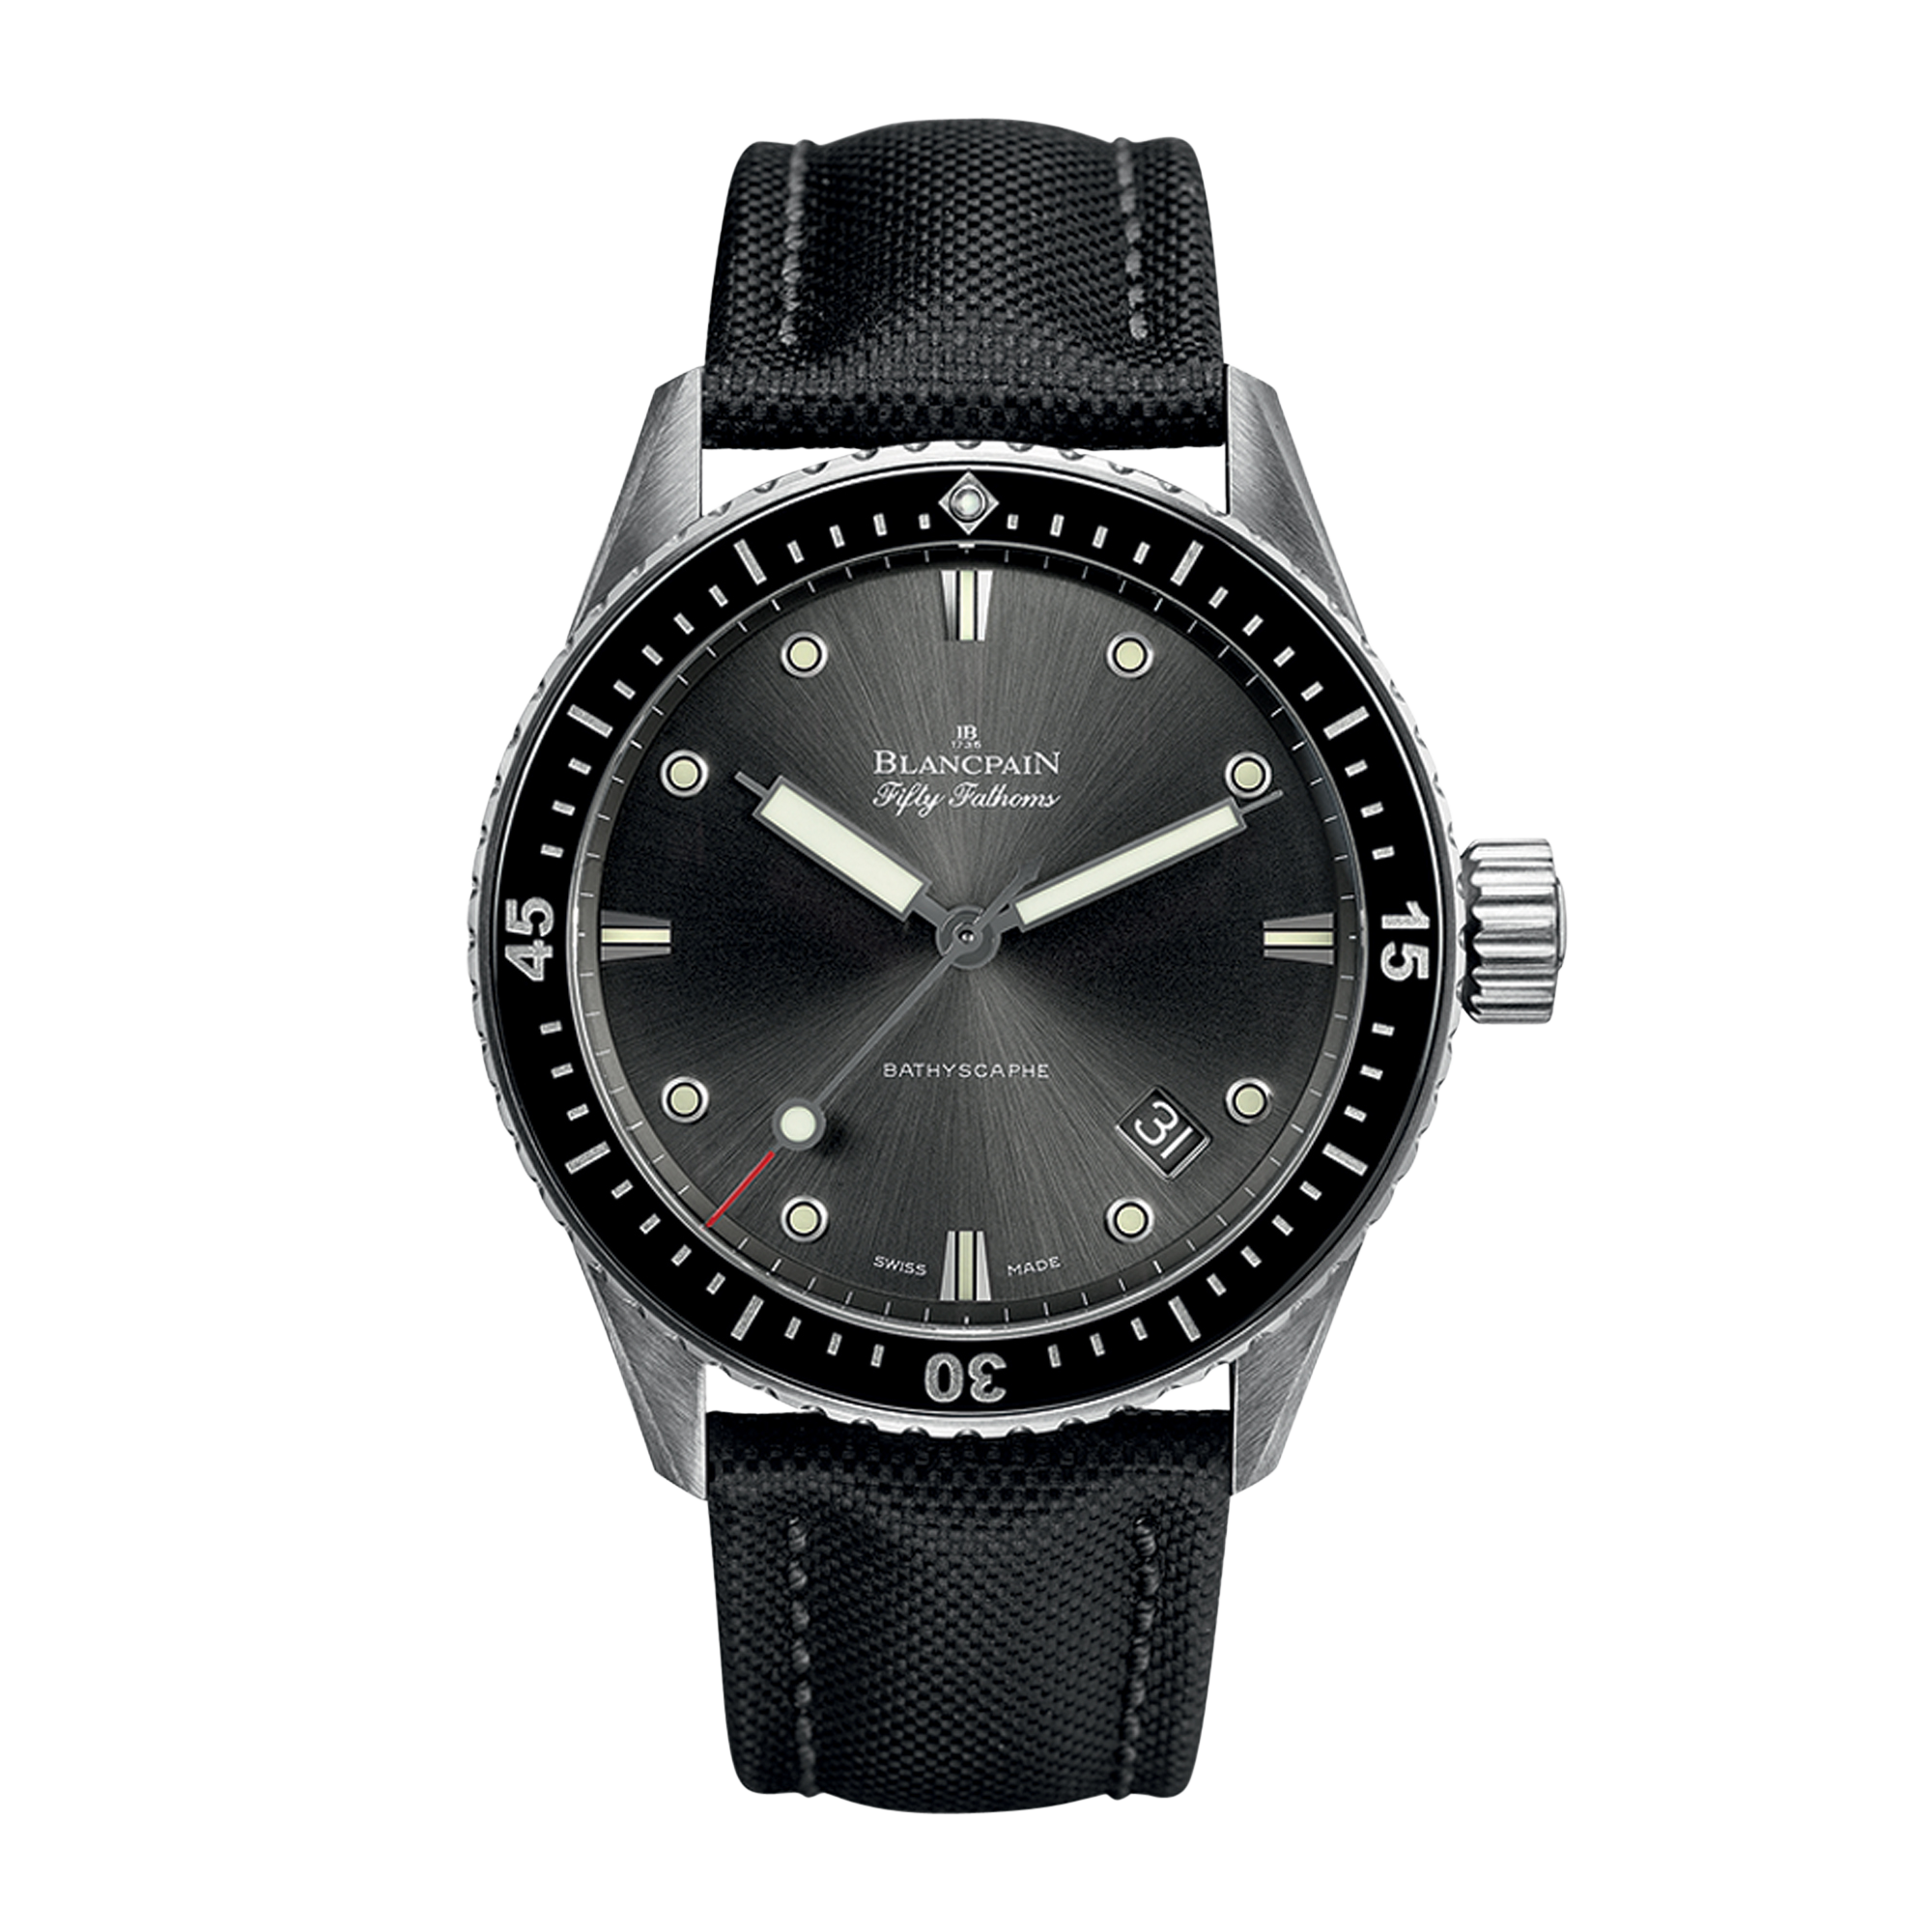 Blancpain Fifty Fathoms Bathscaphe 38mm, Black Dial, Dot and Triangle Numerals_1